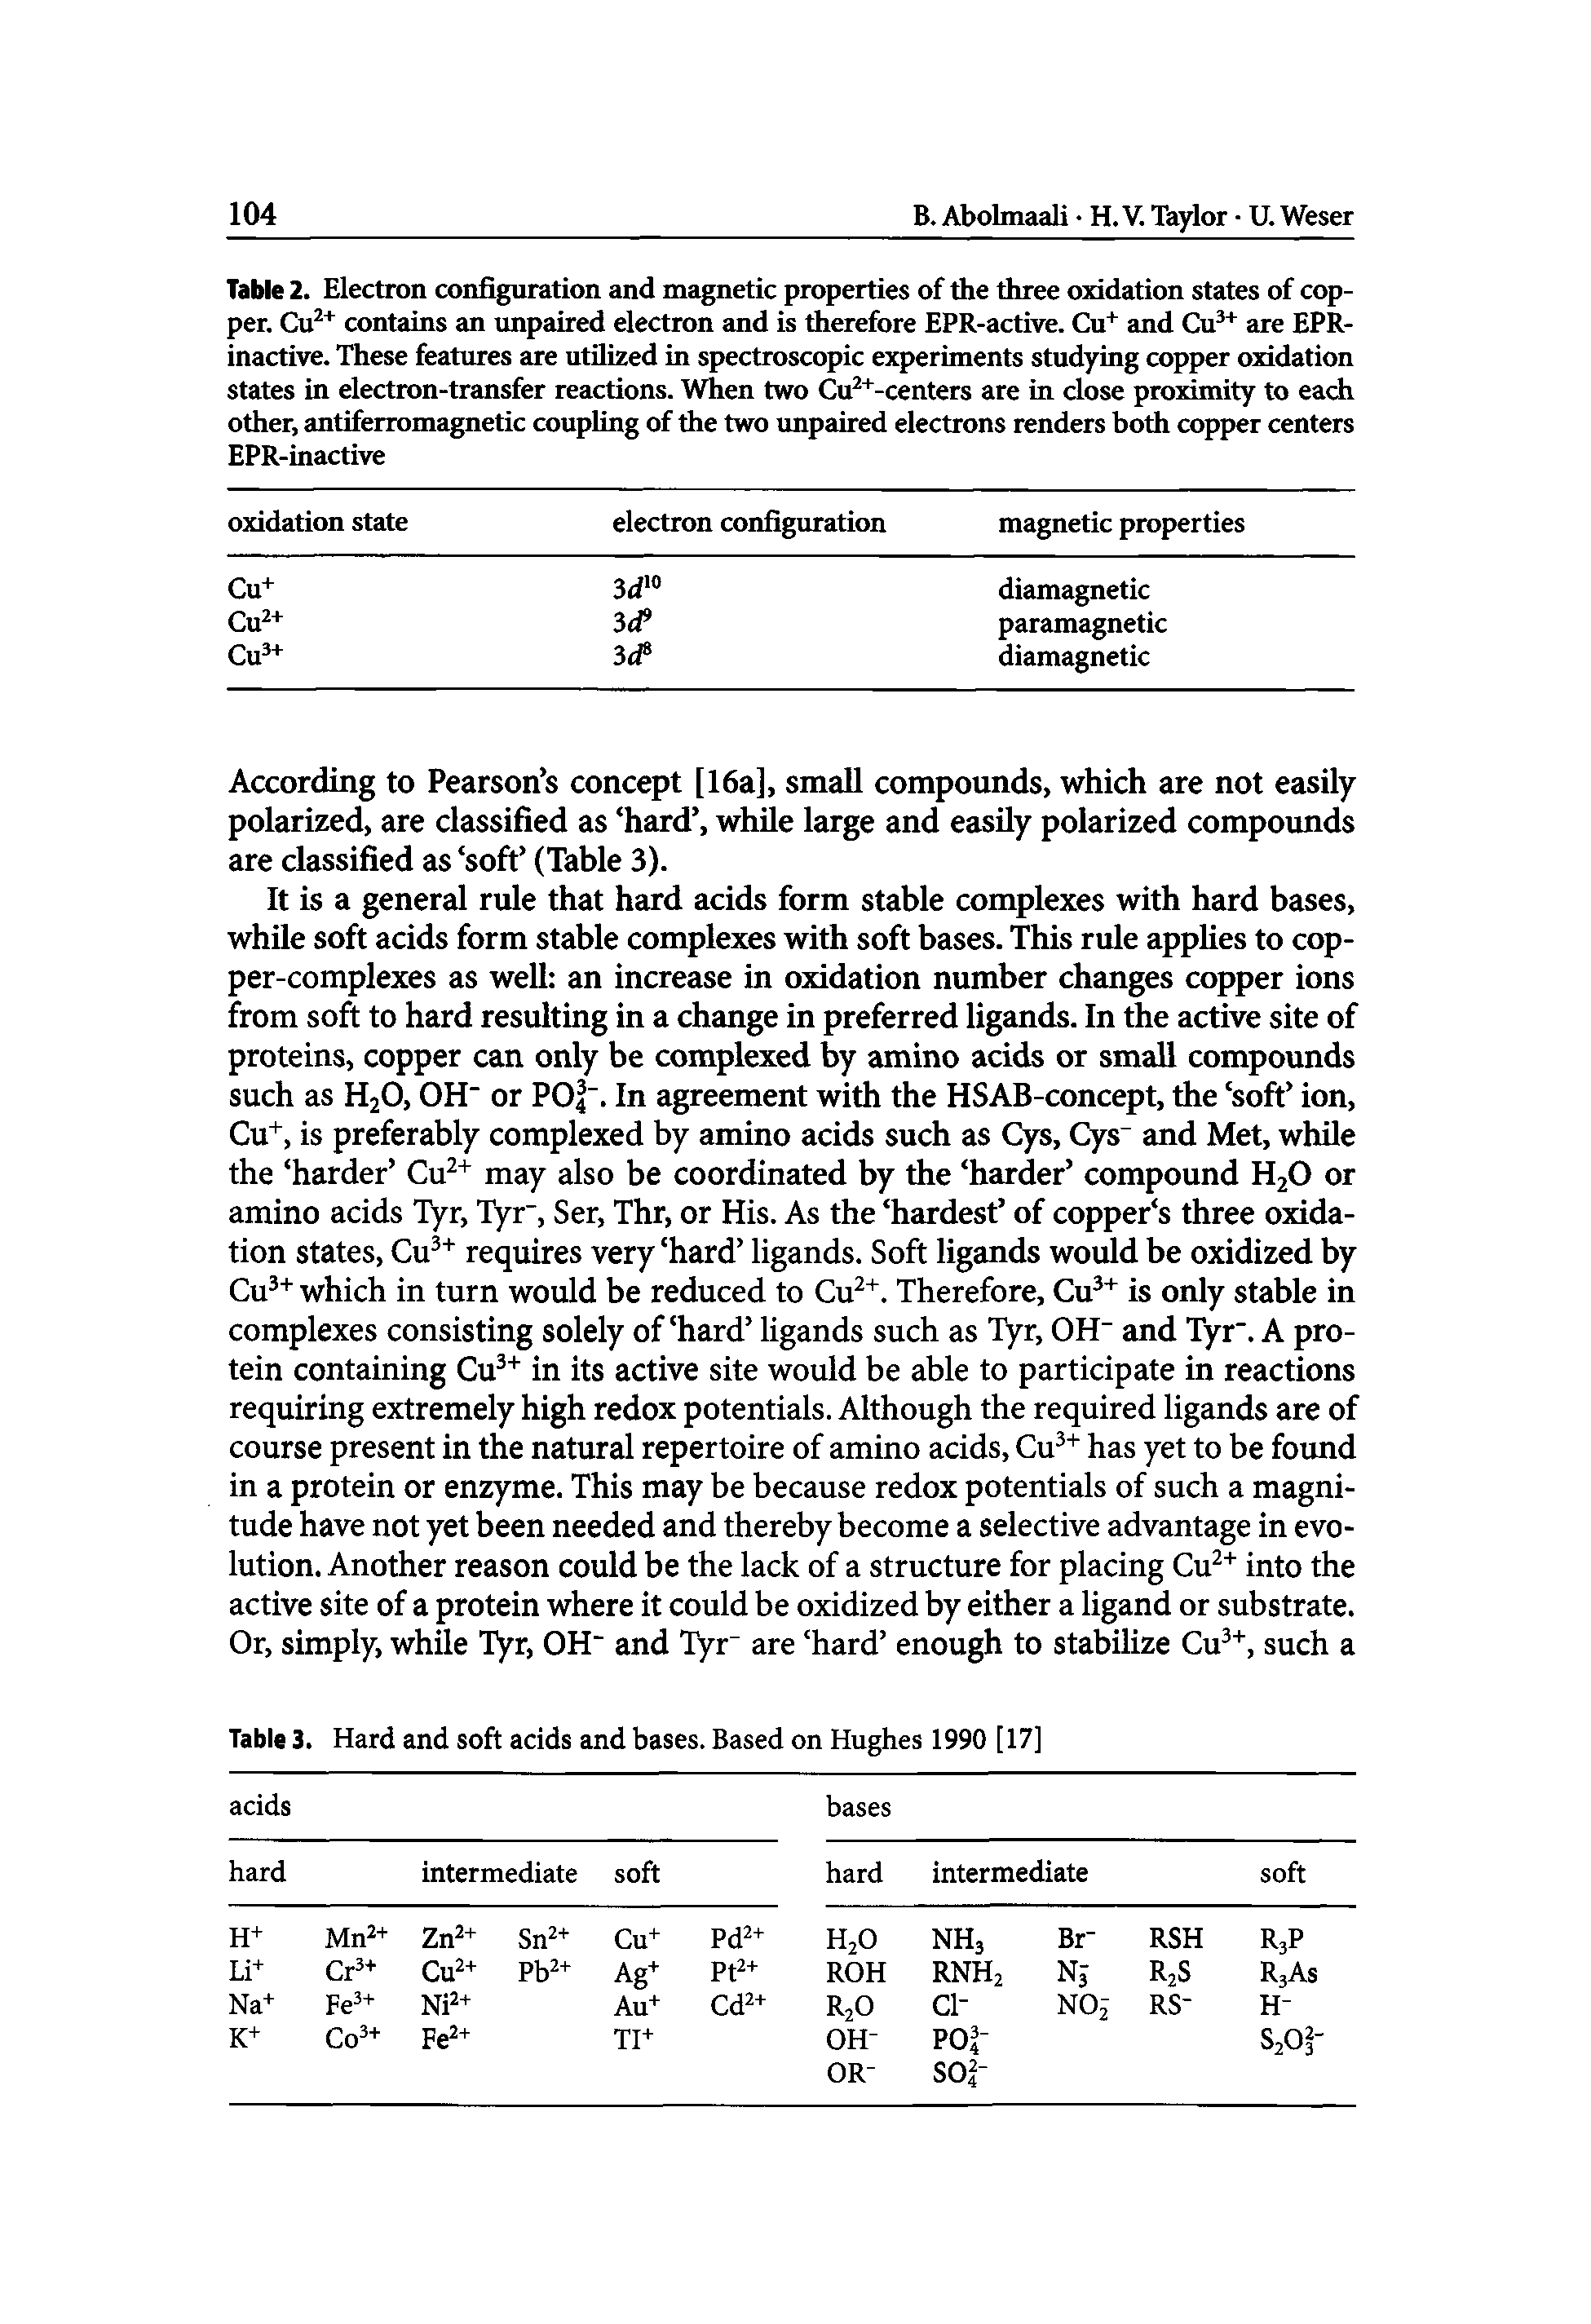 Table 2. Electron configuration and magnetic properties of the three oxidation states of copper. Cu2+ contains an unpaired electron and is therefore EPR-active. Cu+ and Cu3+ are EPR-inactive. These features are utilized in spectroscopic experiments studying copper oxidation states in electron-transfer reactions. When two Cu2+-centers are in close proximity to each other, antiferromagnetic coupling of the two unpaired electrons renders both copper centers EPR-inactive...